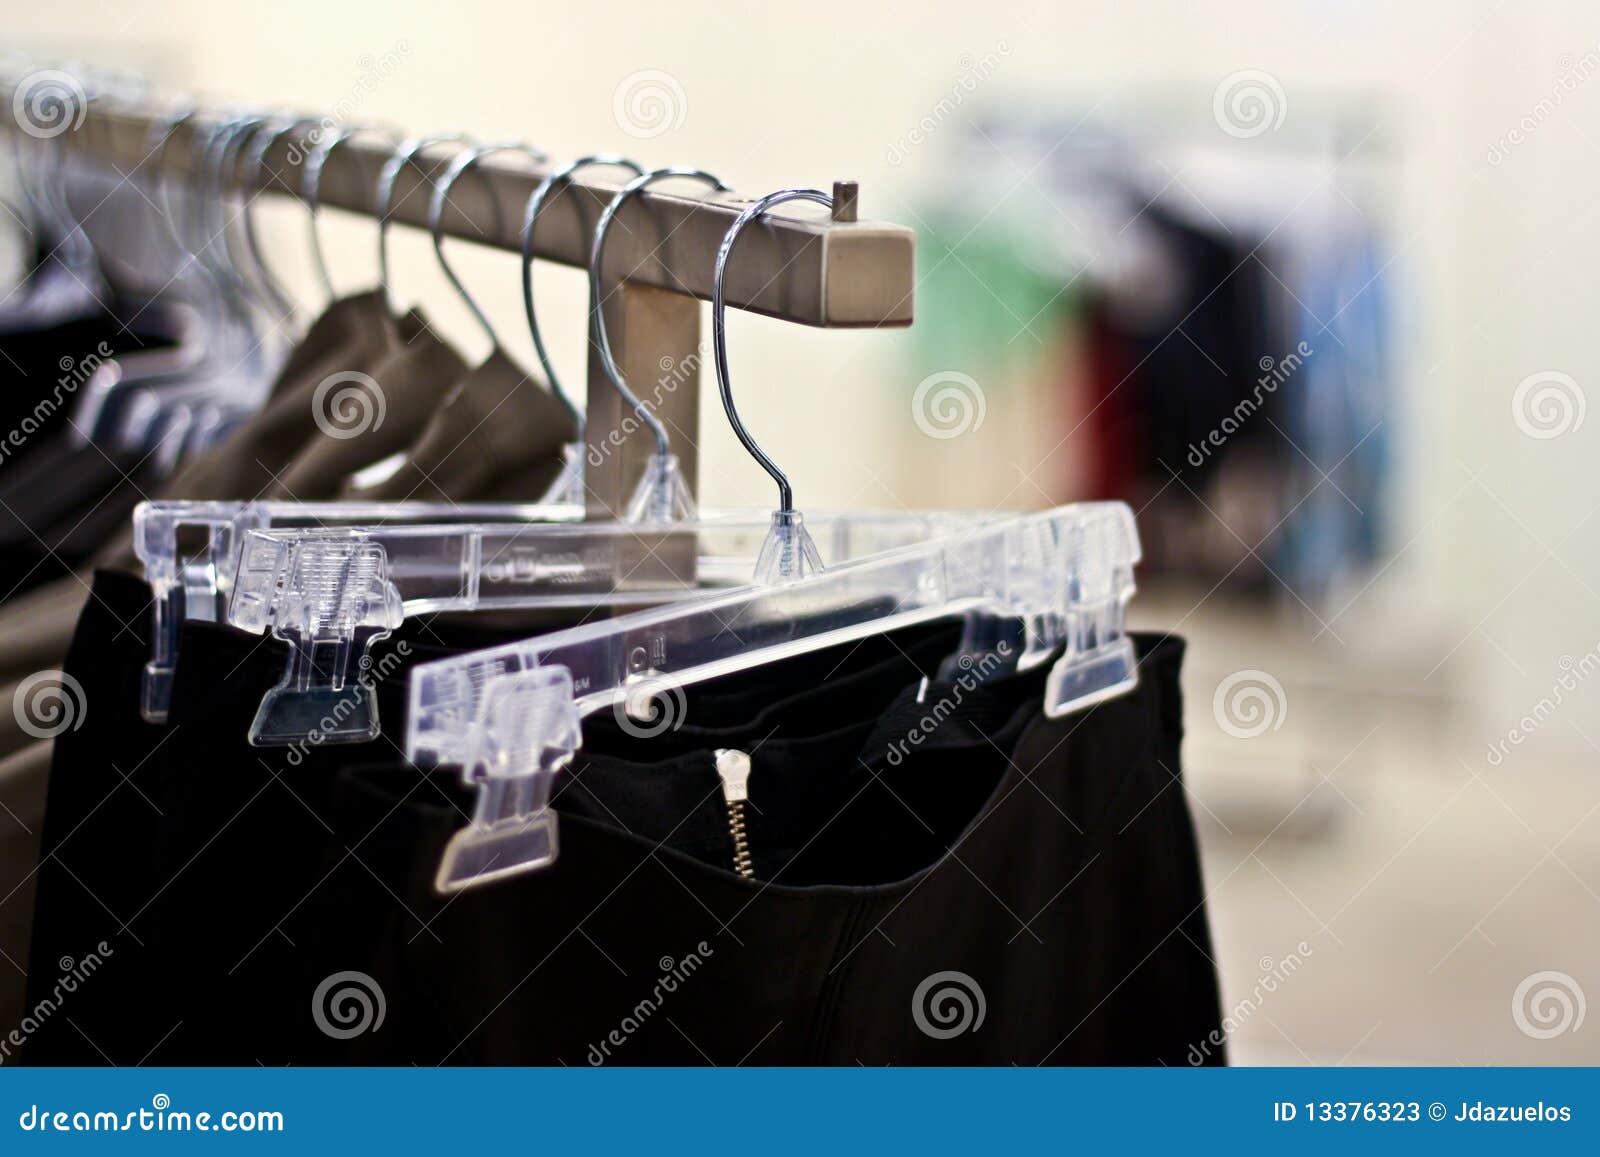 Racks of Skirts Hanging in a Store Stock Image - Image of colored ...